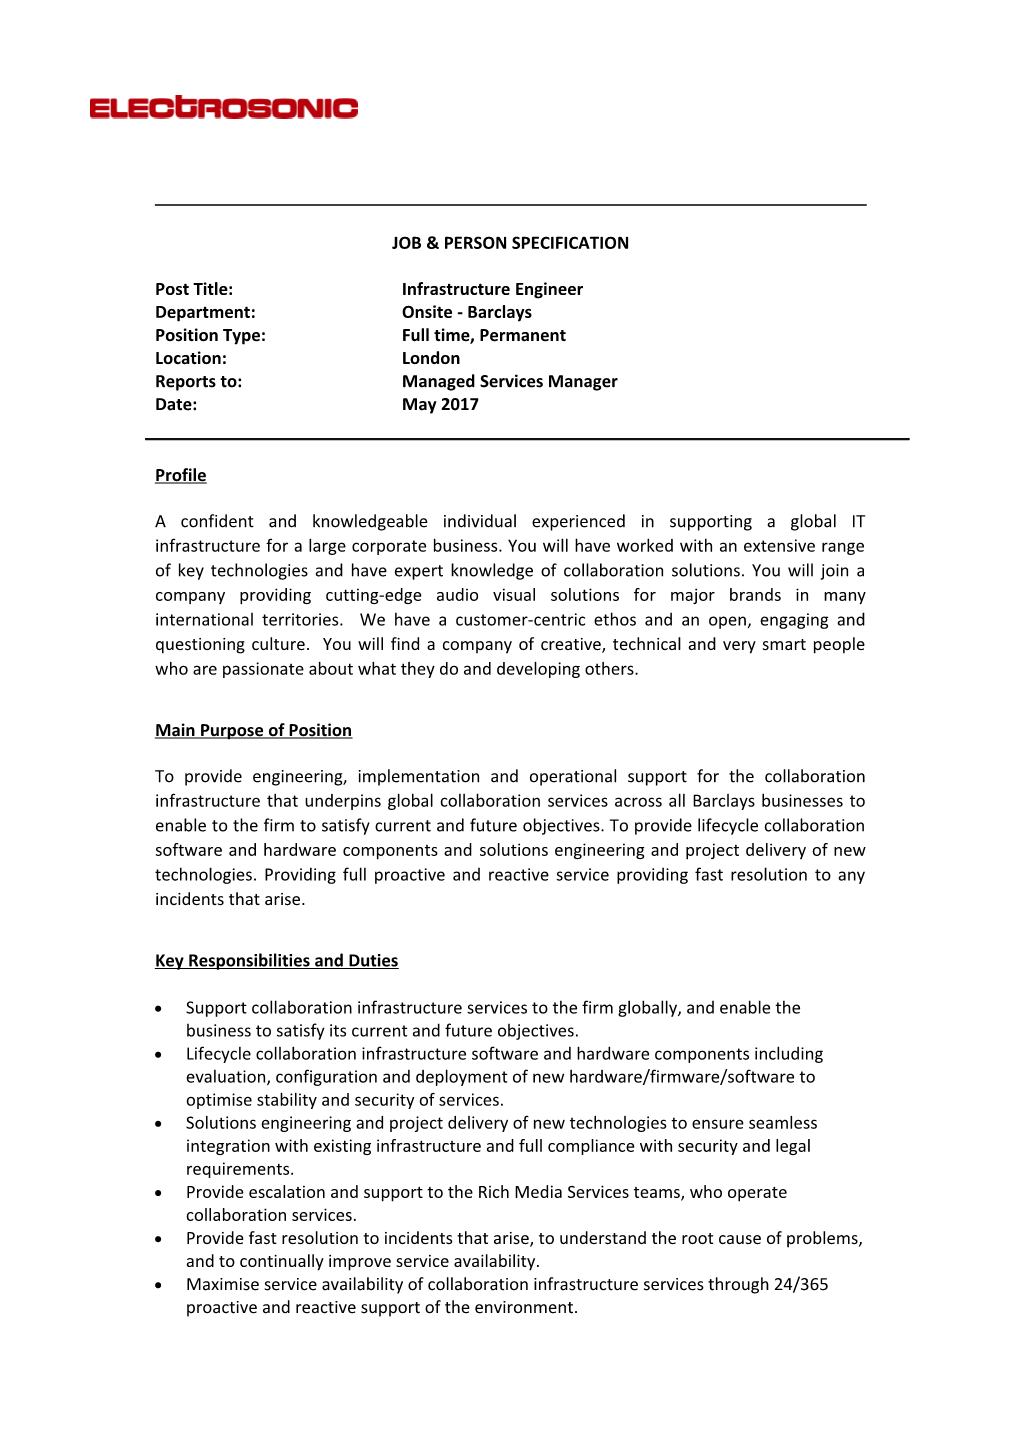 Job & Person Specification s1